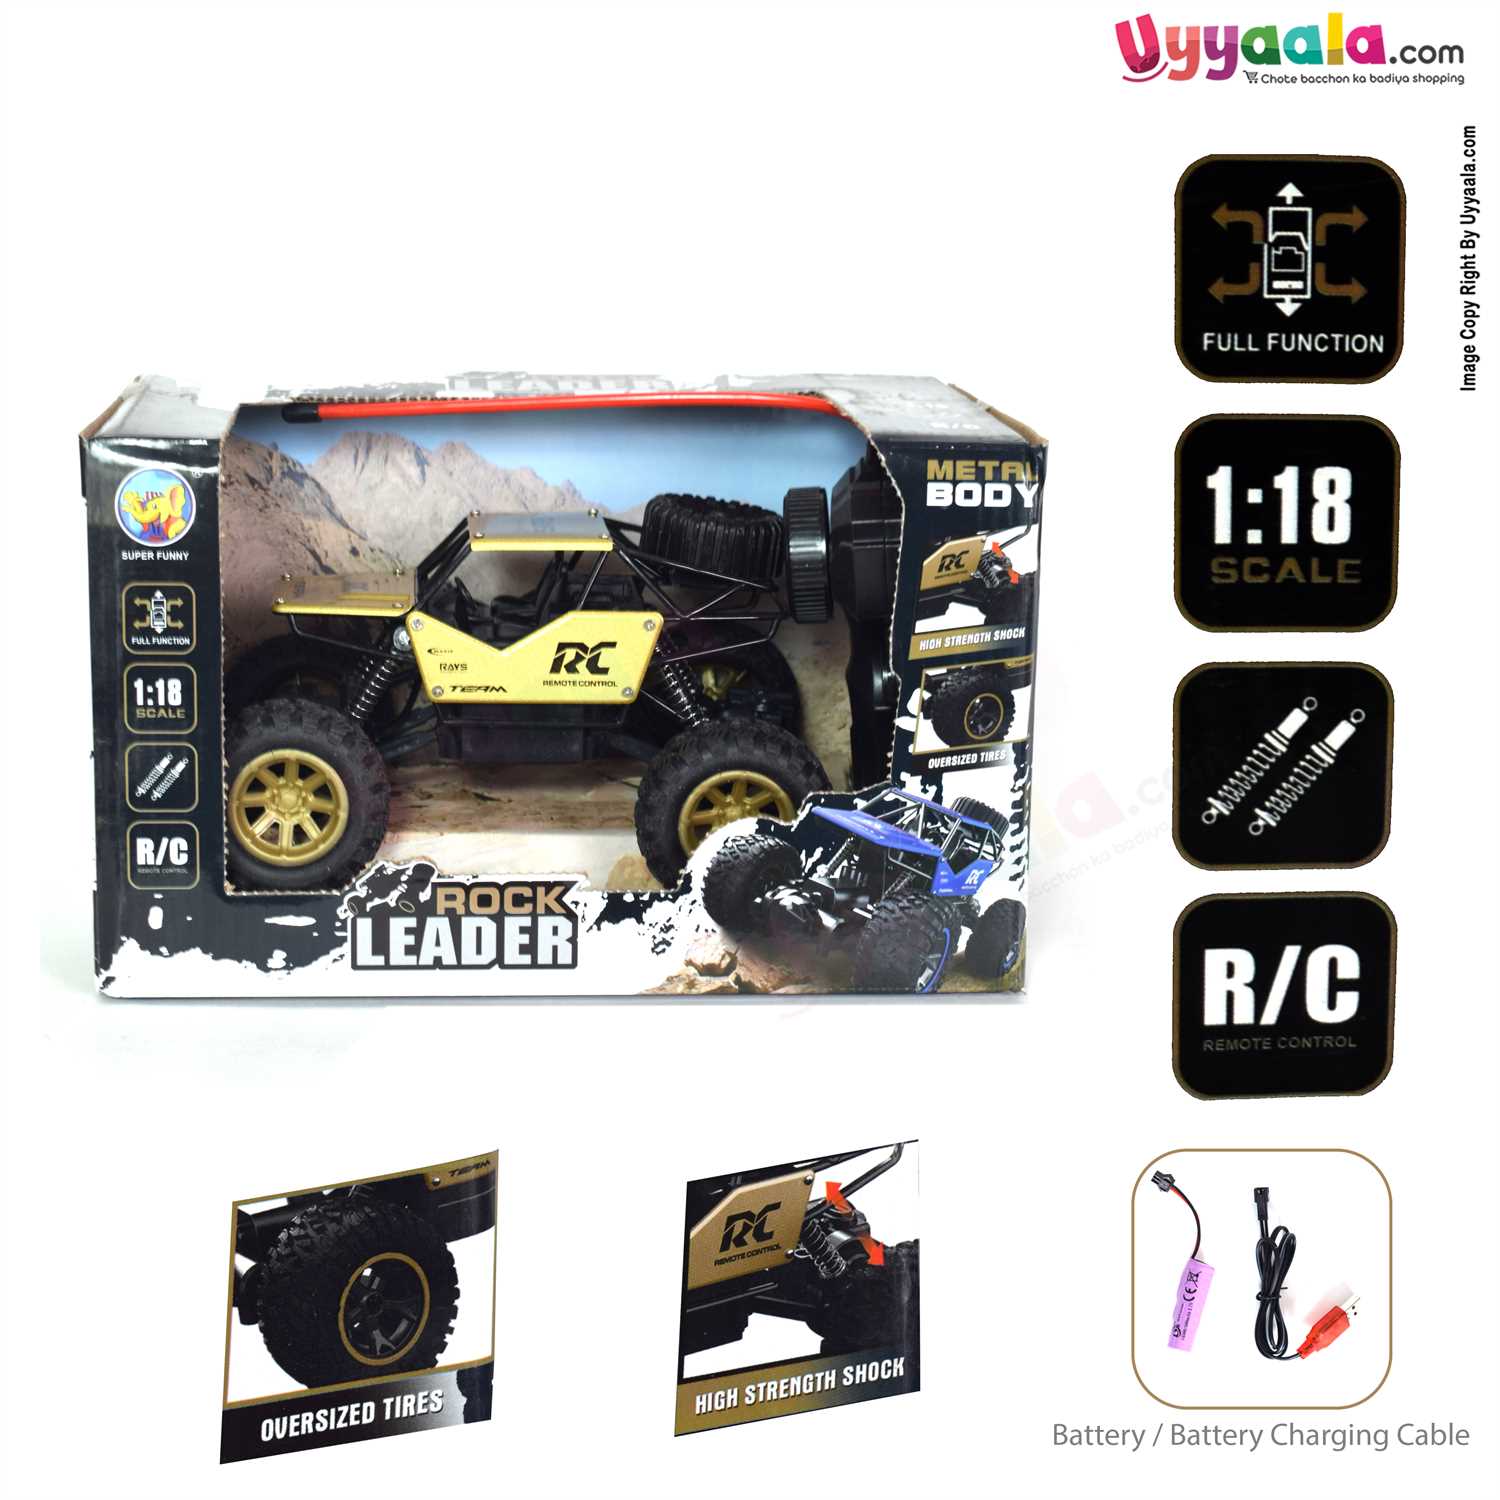 Rock Leader Remote Control Jeep With Metal Body For Kids - 3+y